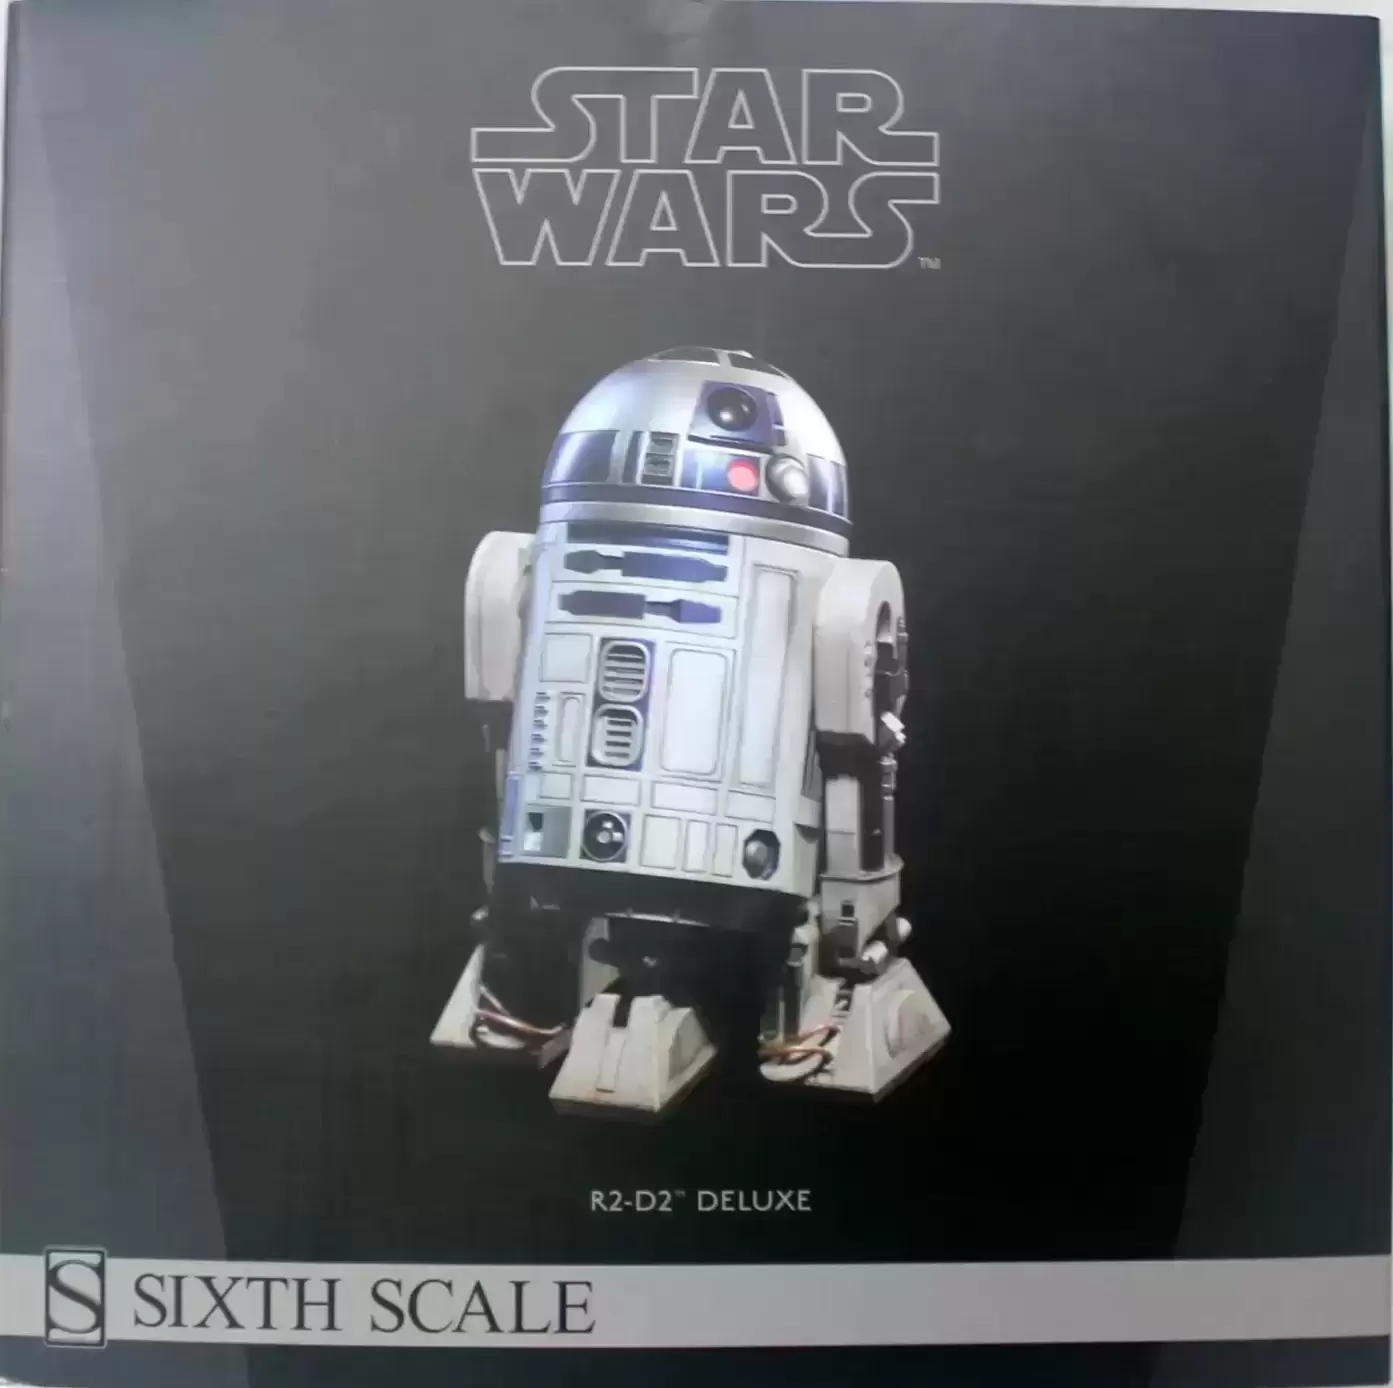 Sideshow - Star Wars - R2-D2 Deluxe